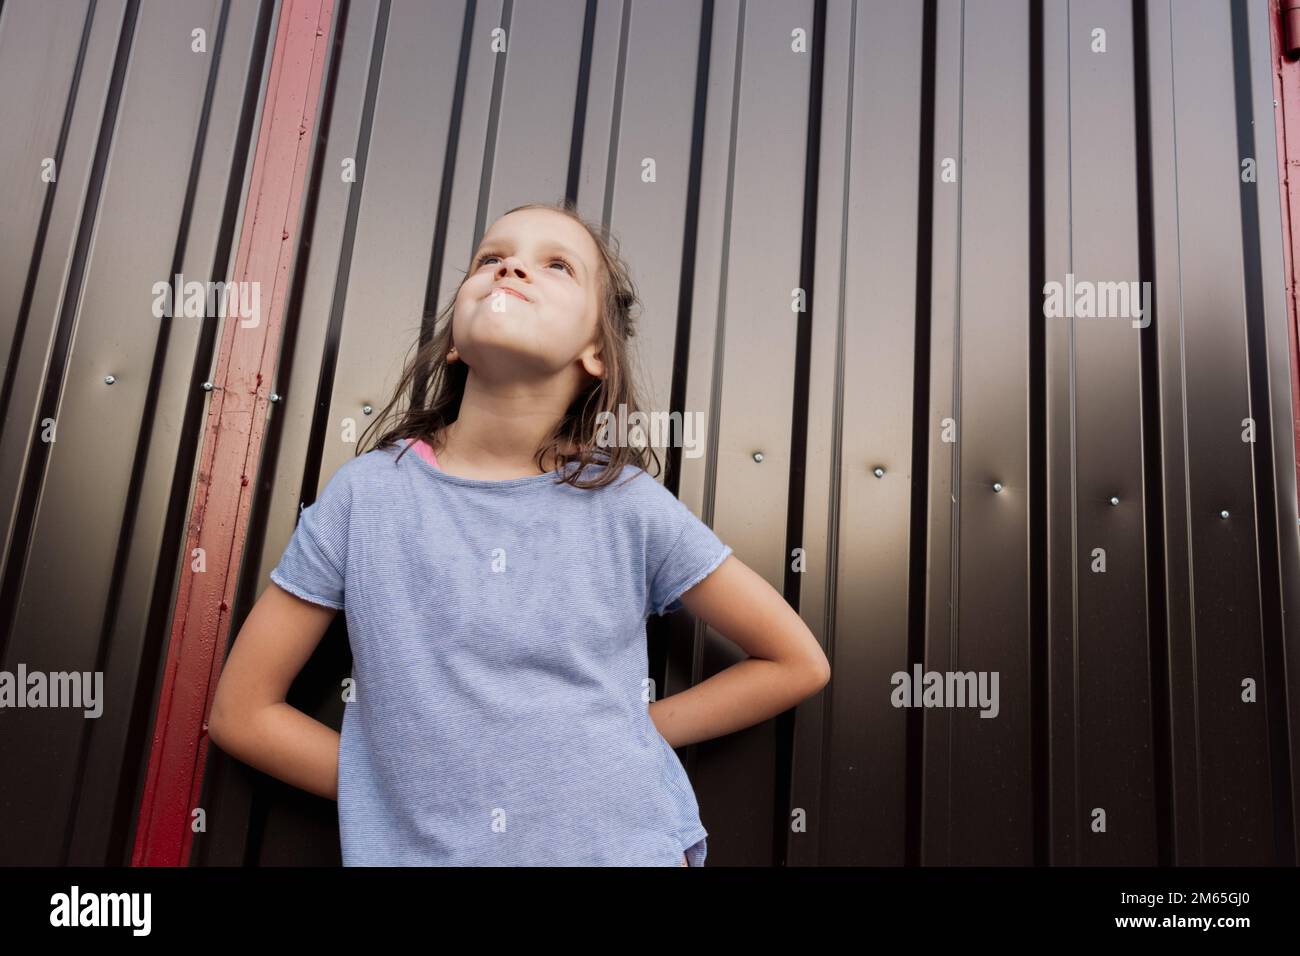 Low angle view portrait of a happy girl standing against garage door and looking up Stock Photo